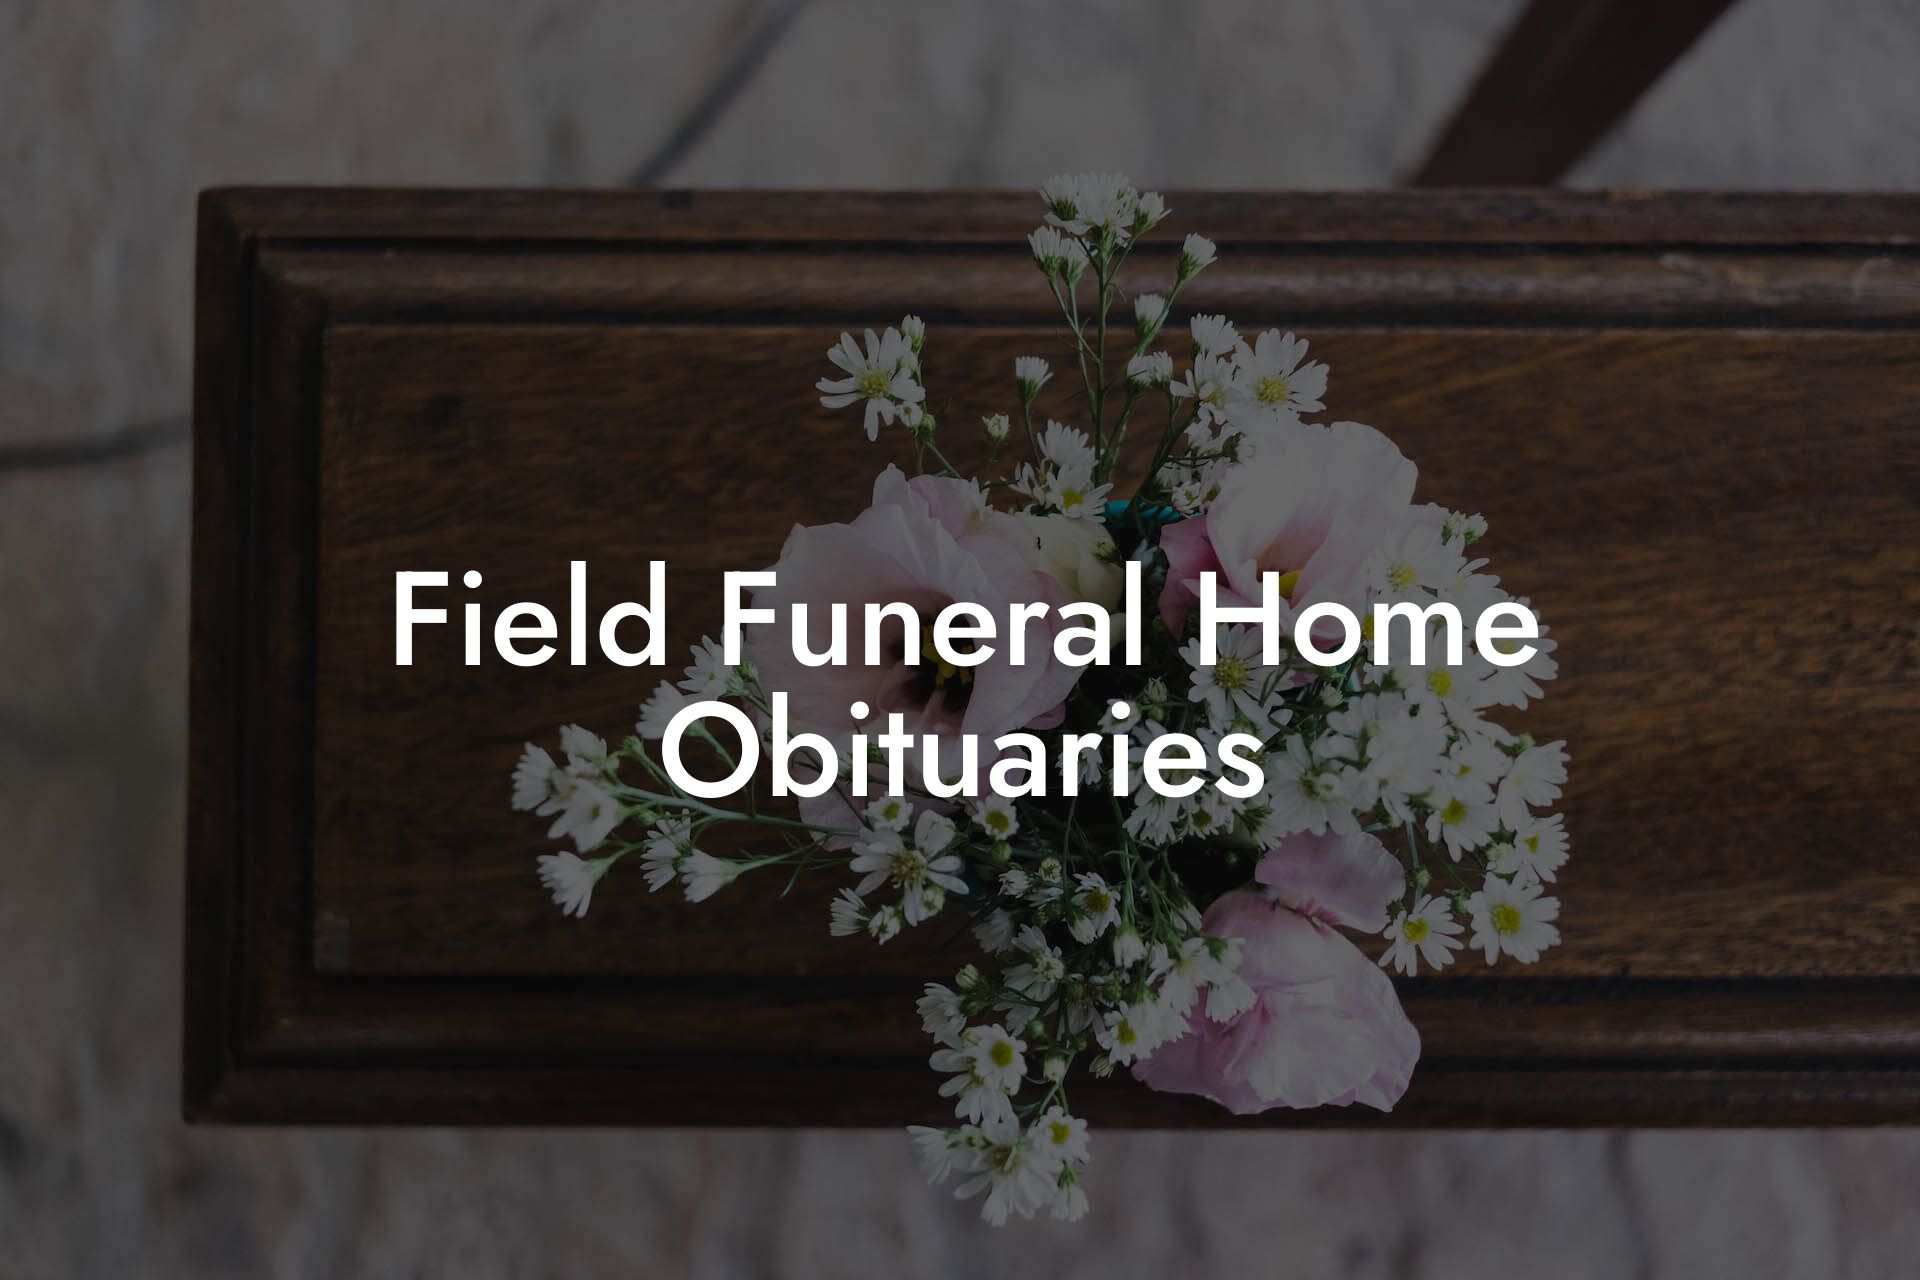 Field Funeral Home Obituaries